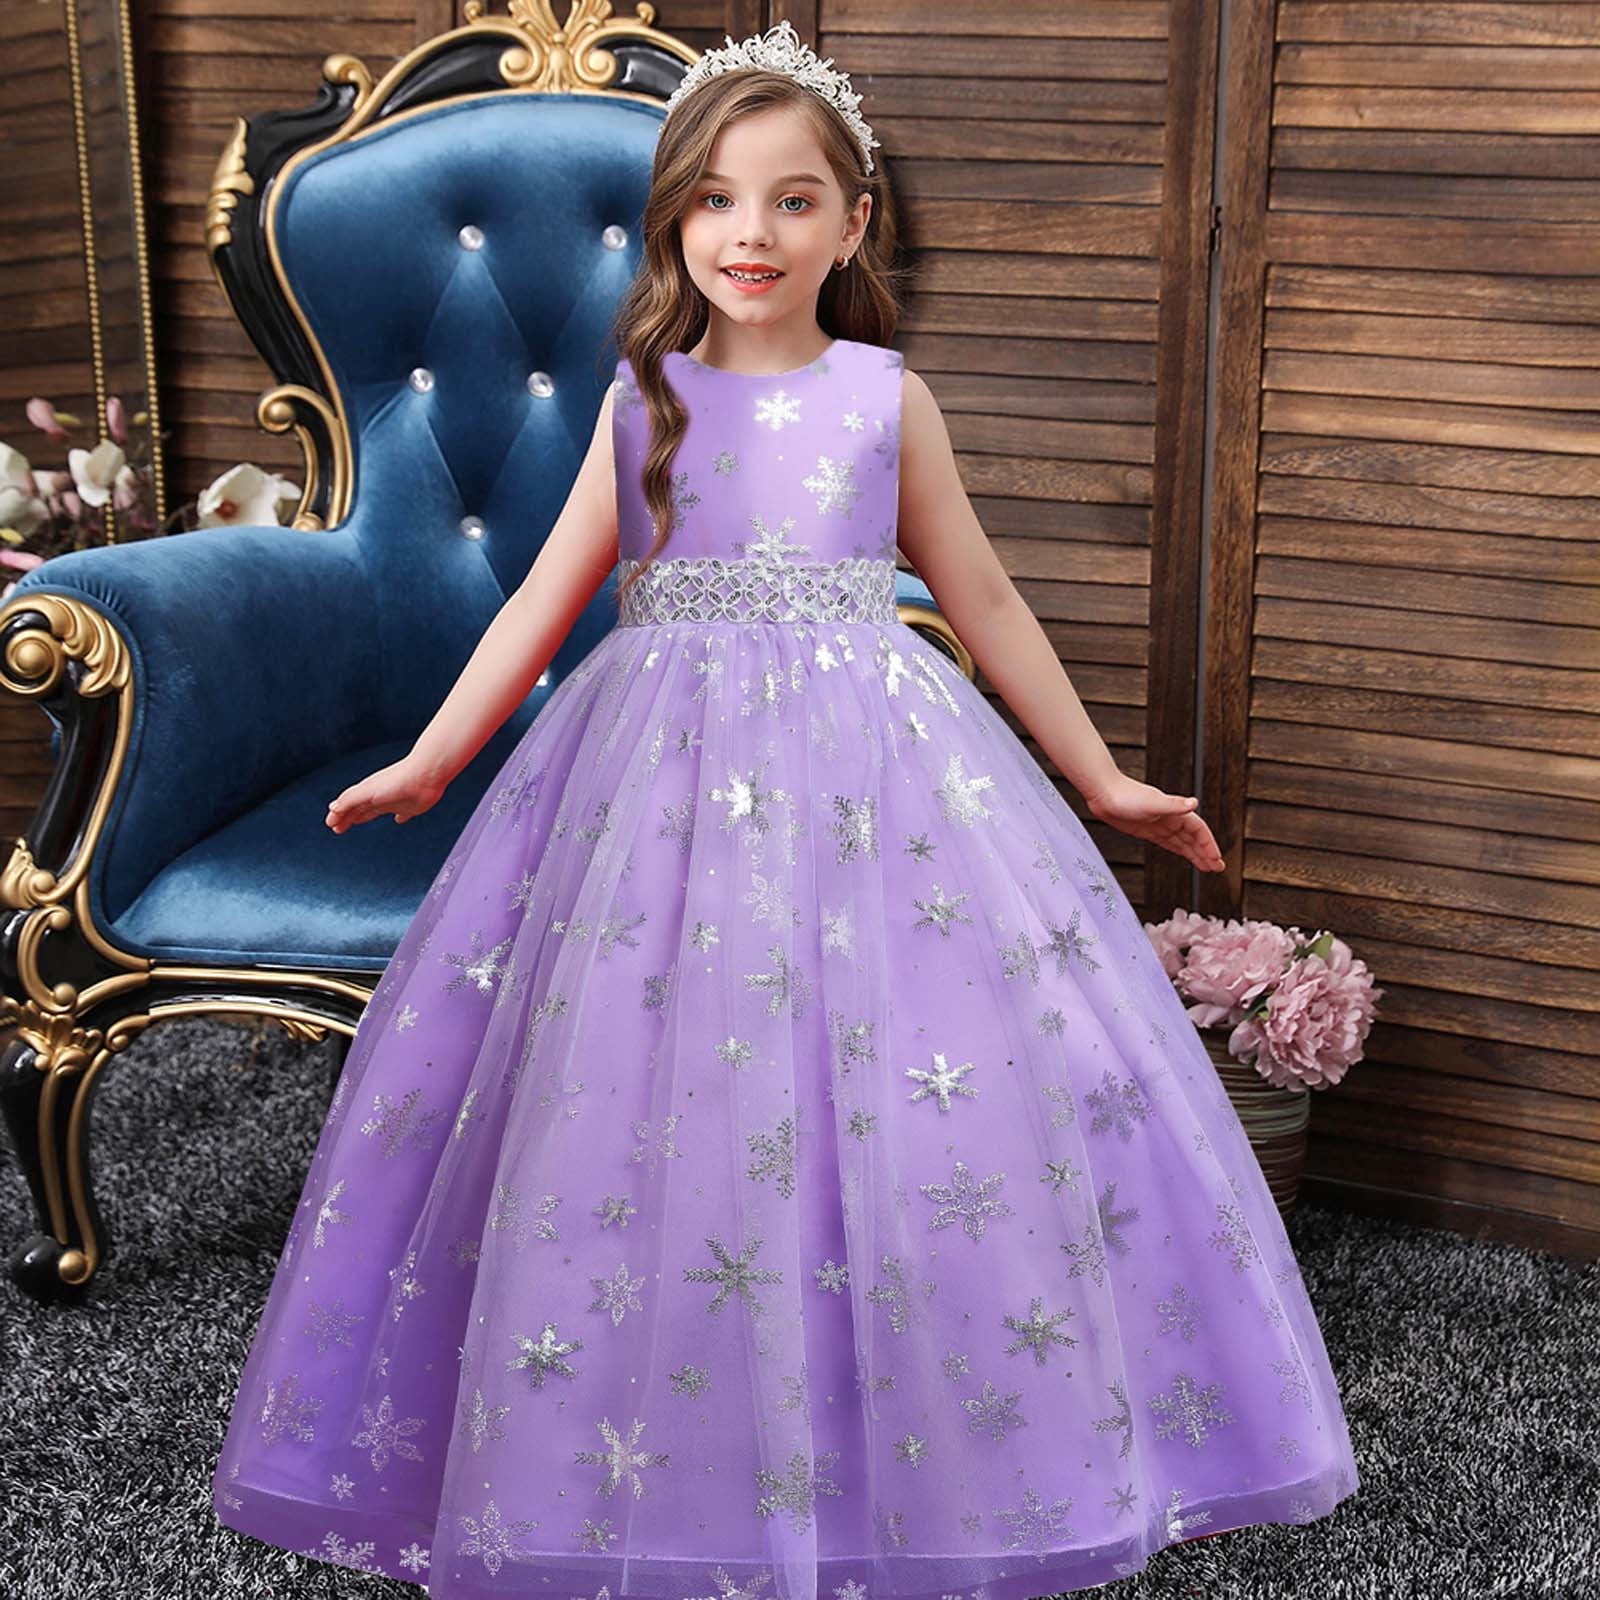 Gold Blue Off Shoulder Flower Girl Princess Evening Gown With Lace  Appliques, Beads, And Shiny Bling Perfect For Pageants, Birthdays, 2 12  Years From Weddingpromgirl, $121.27 | DHgate.Com